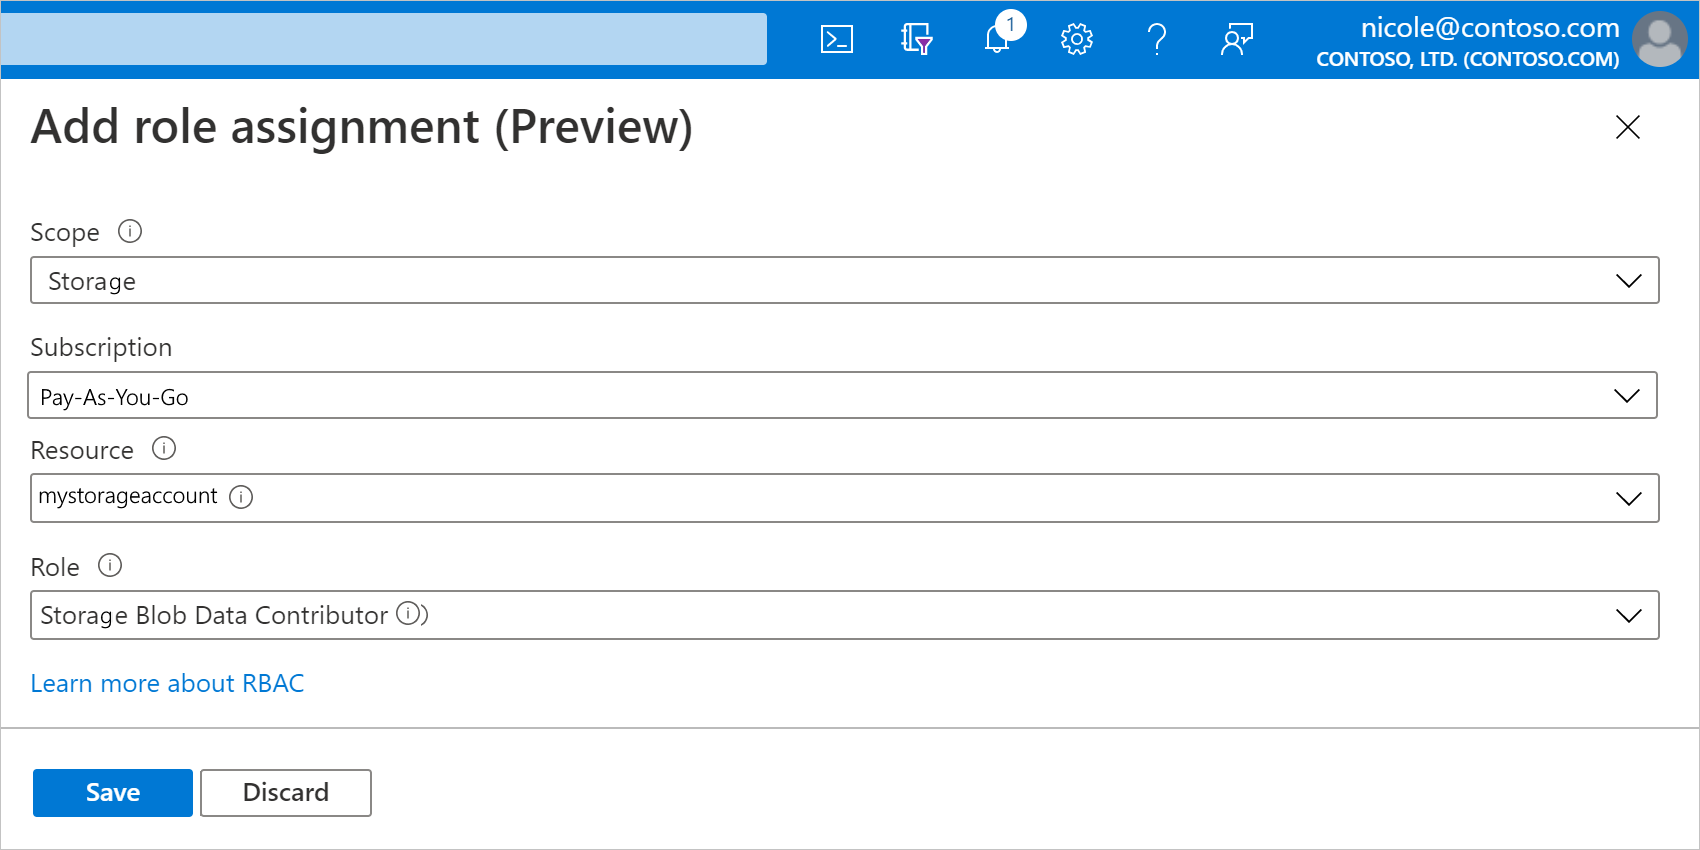 Screenshot of role assignment configuration pane, showing settings for scope, subscription, resource, and role.